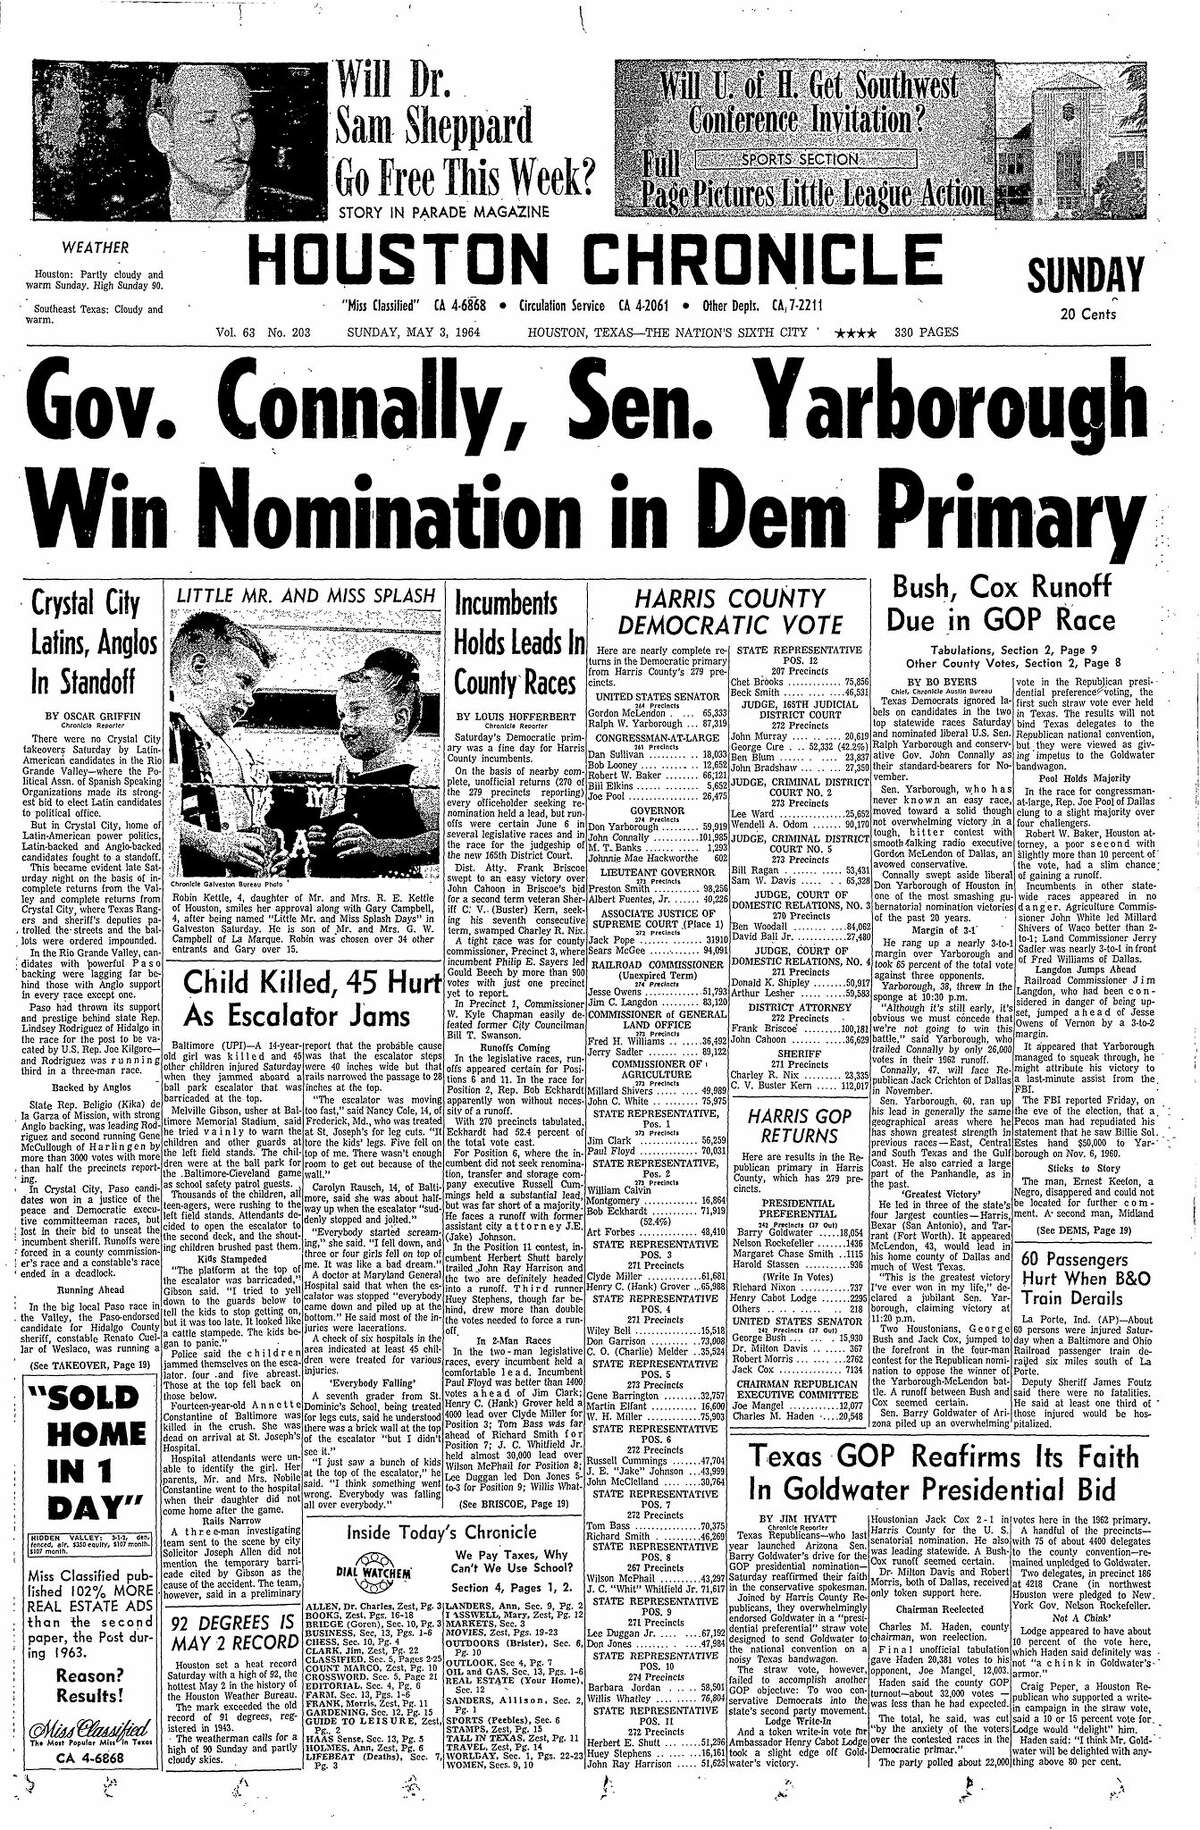 Houston Chronicle front page for May 3, 1964.